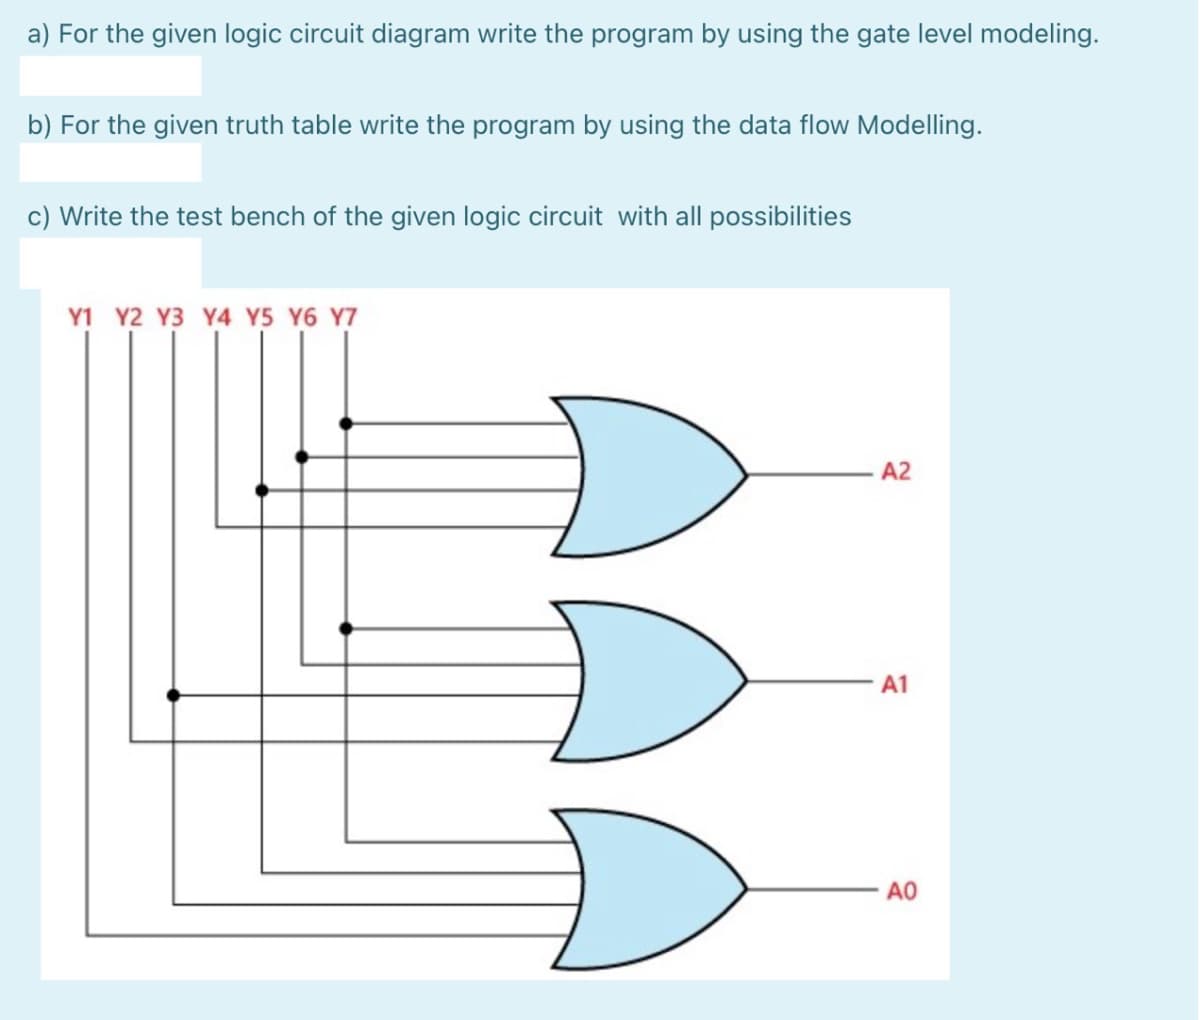 a) For the given logic circuit diagram write the program by using the gate level modeling.
b) For the given truth table write the program by using the data flow Modelling.
c) Write the test bench of the given logic circuit with all possibilities
Y1 Y2 Y3 Y4 Y5 Y6 Y7
A2
A1
A0
